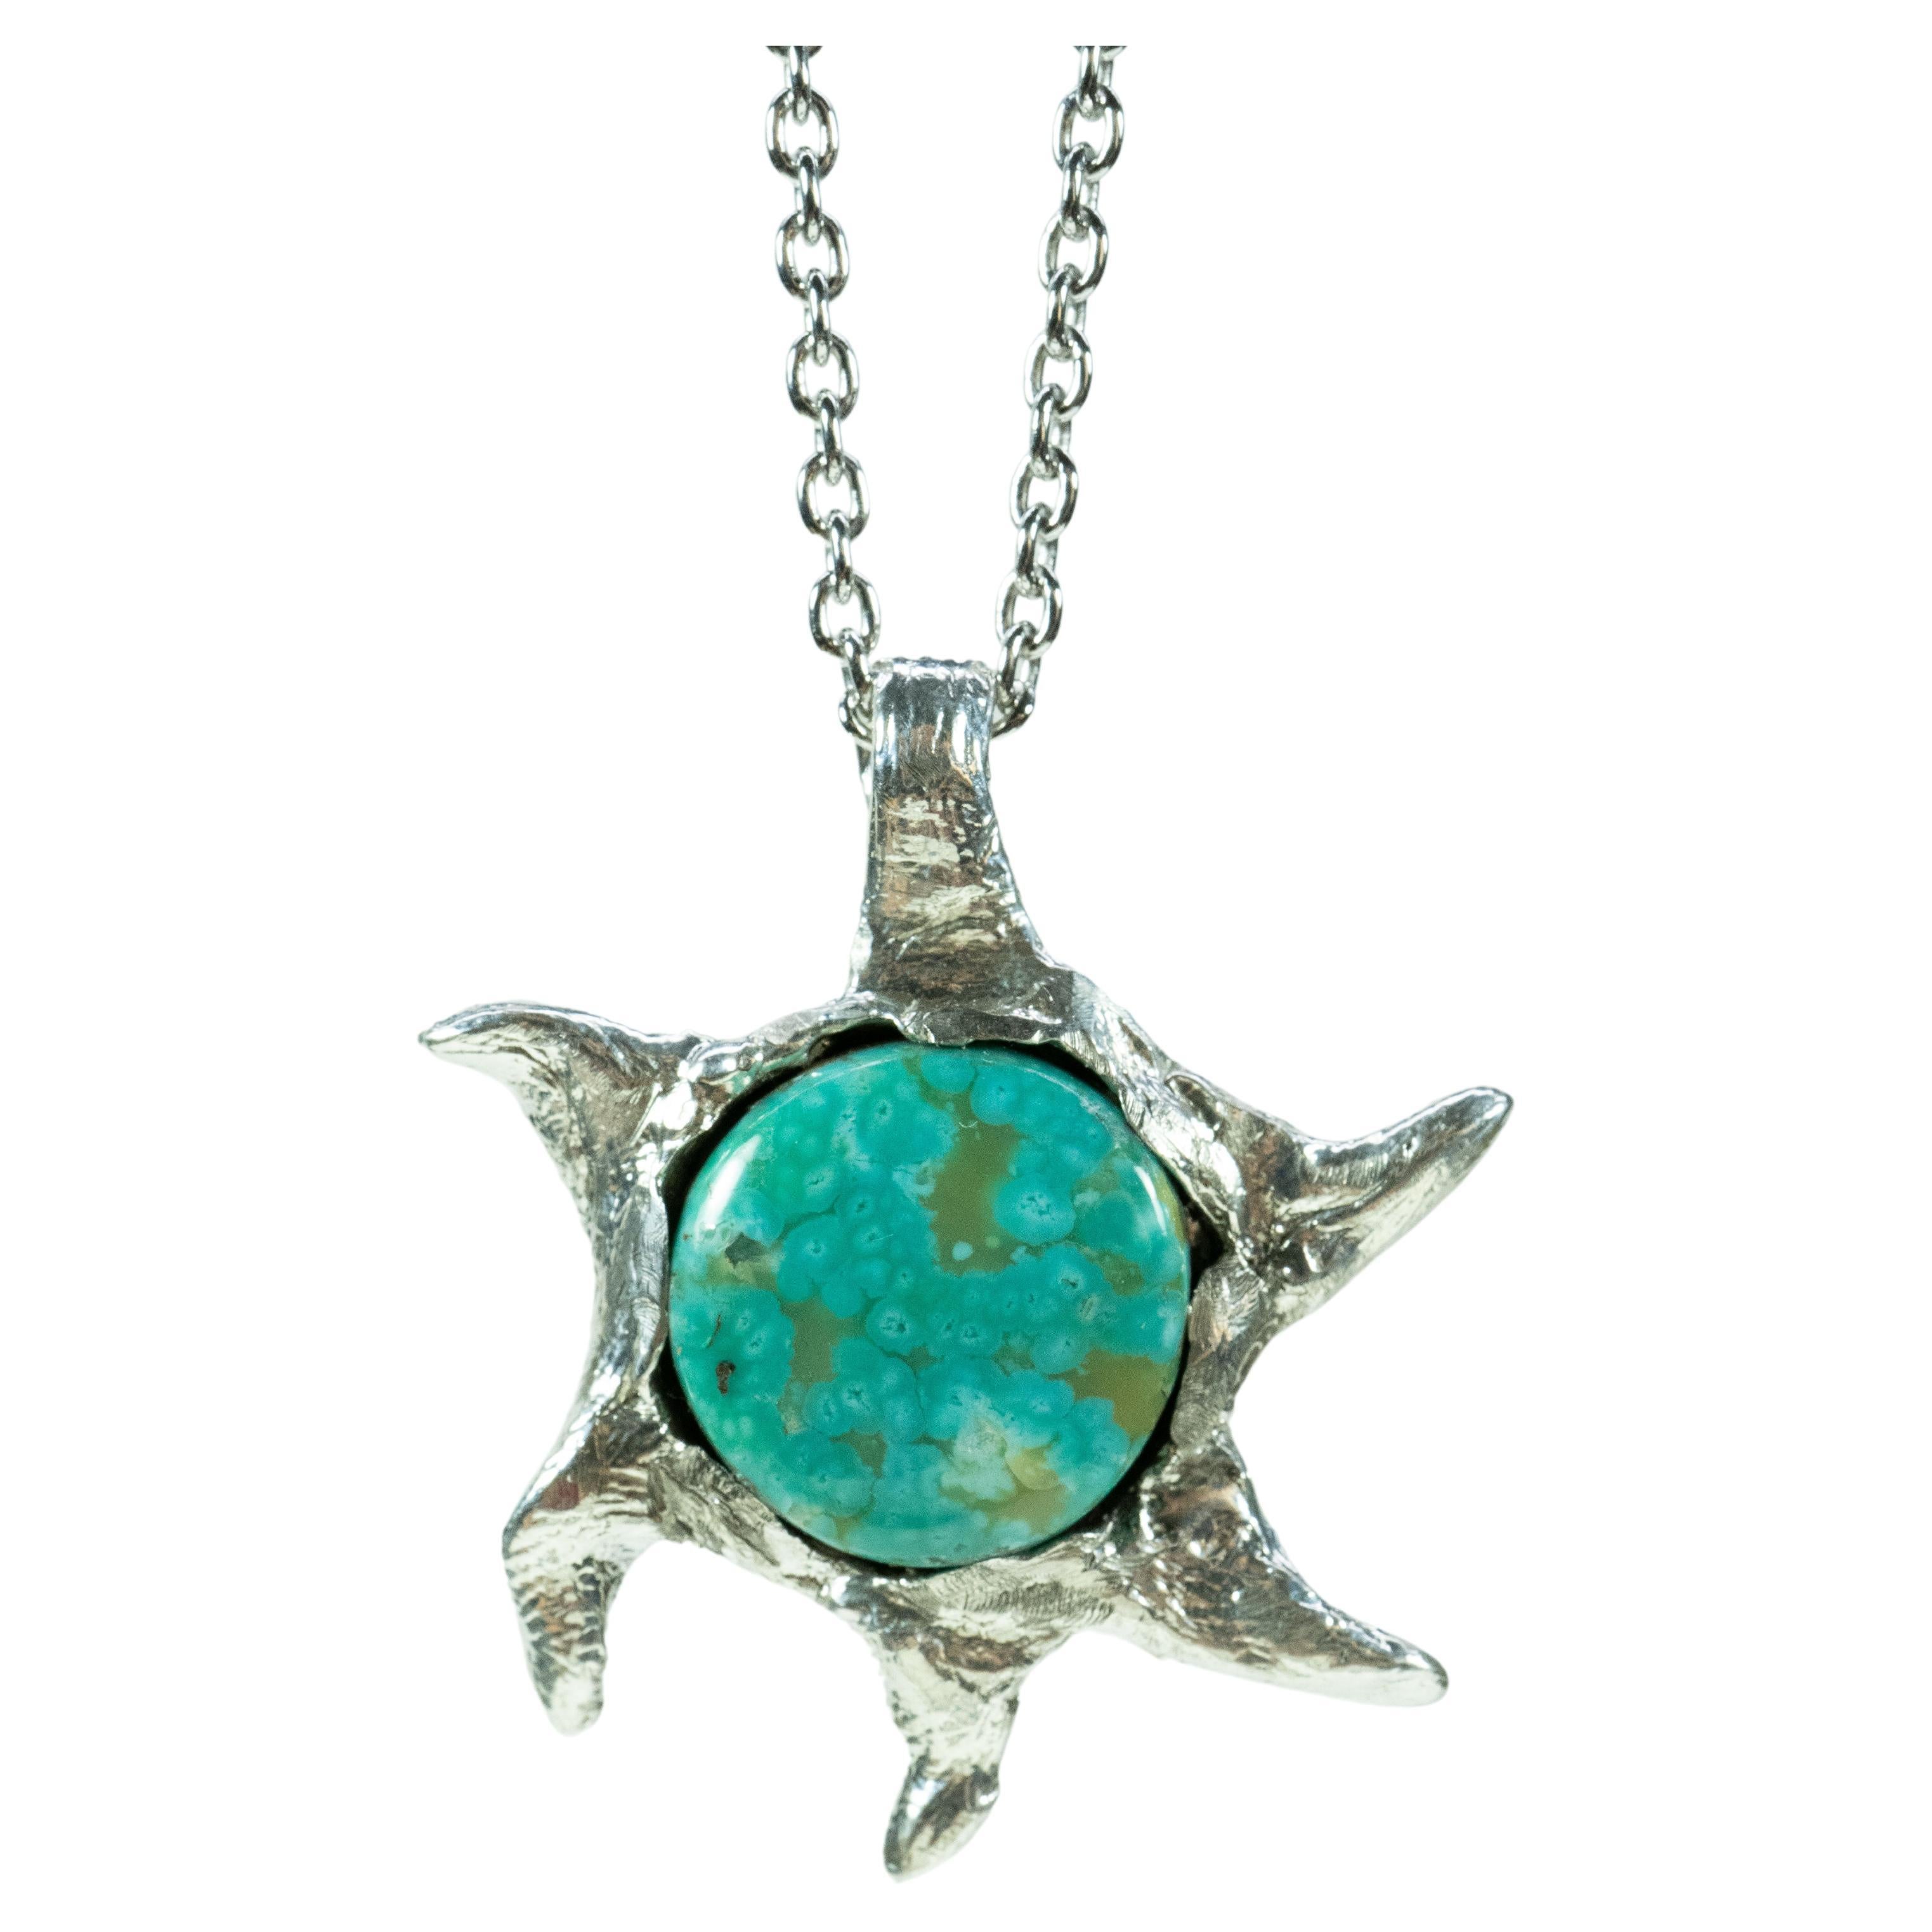 Galaxy (Turquoise, Sterling Silver Pendant) by Ken Fury